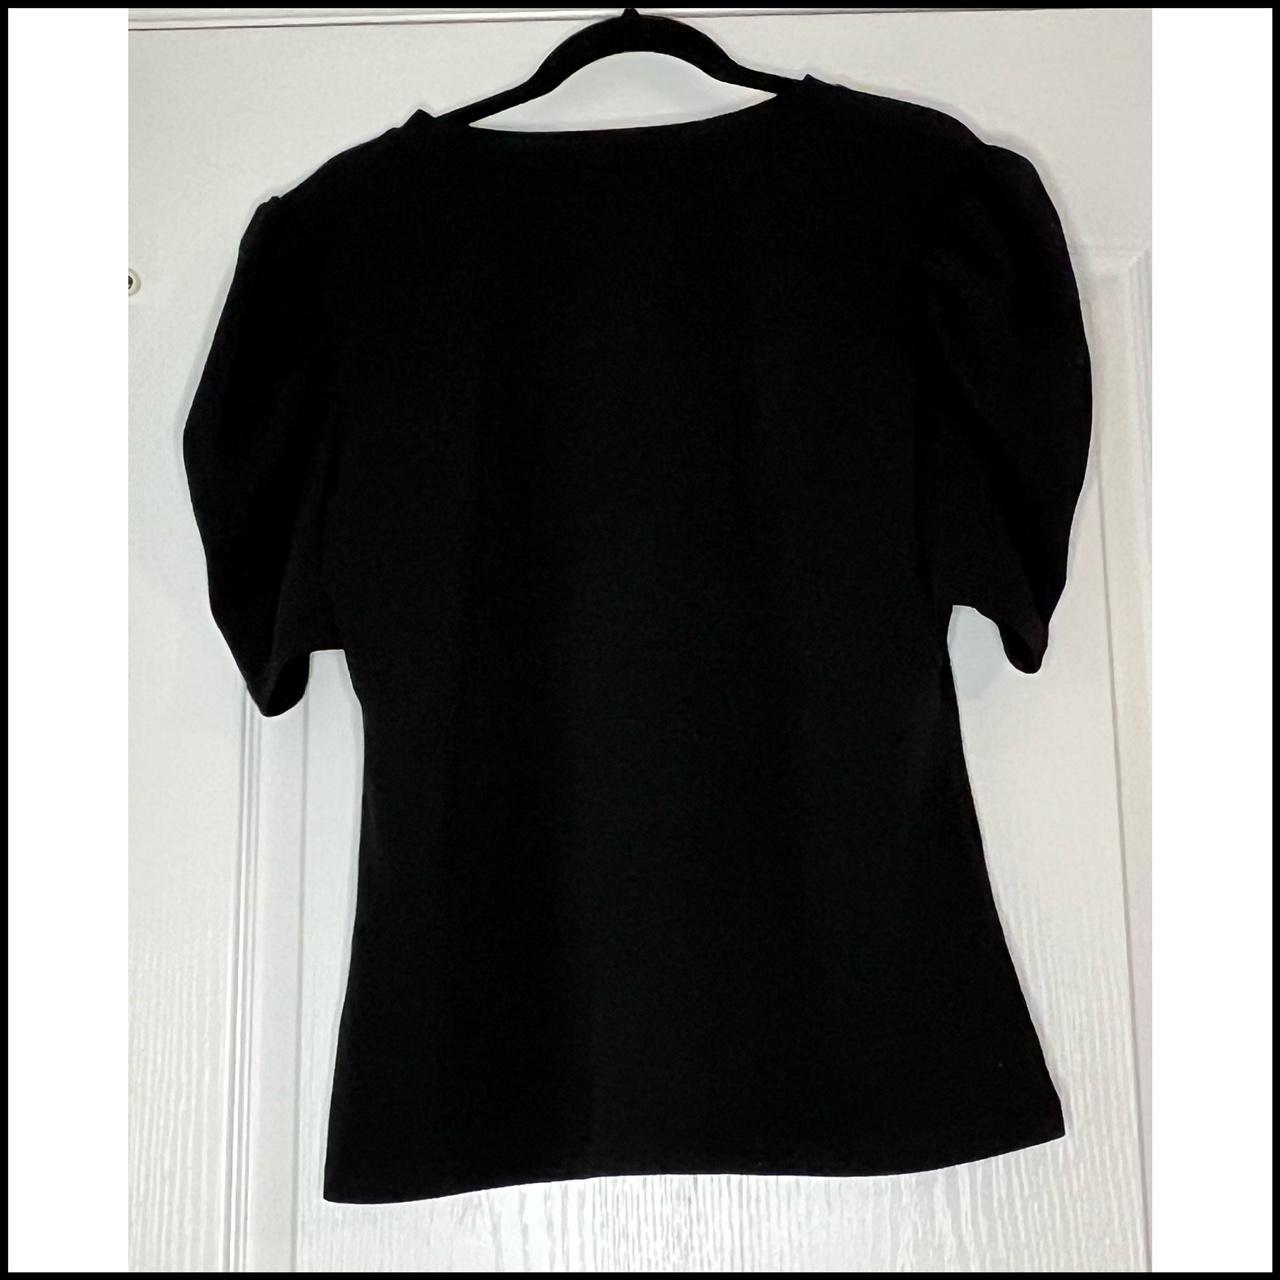 SheIn Pre Loved Plus Size Curve 2XL Black Top Great Condition